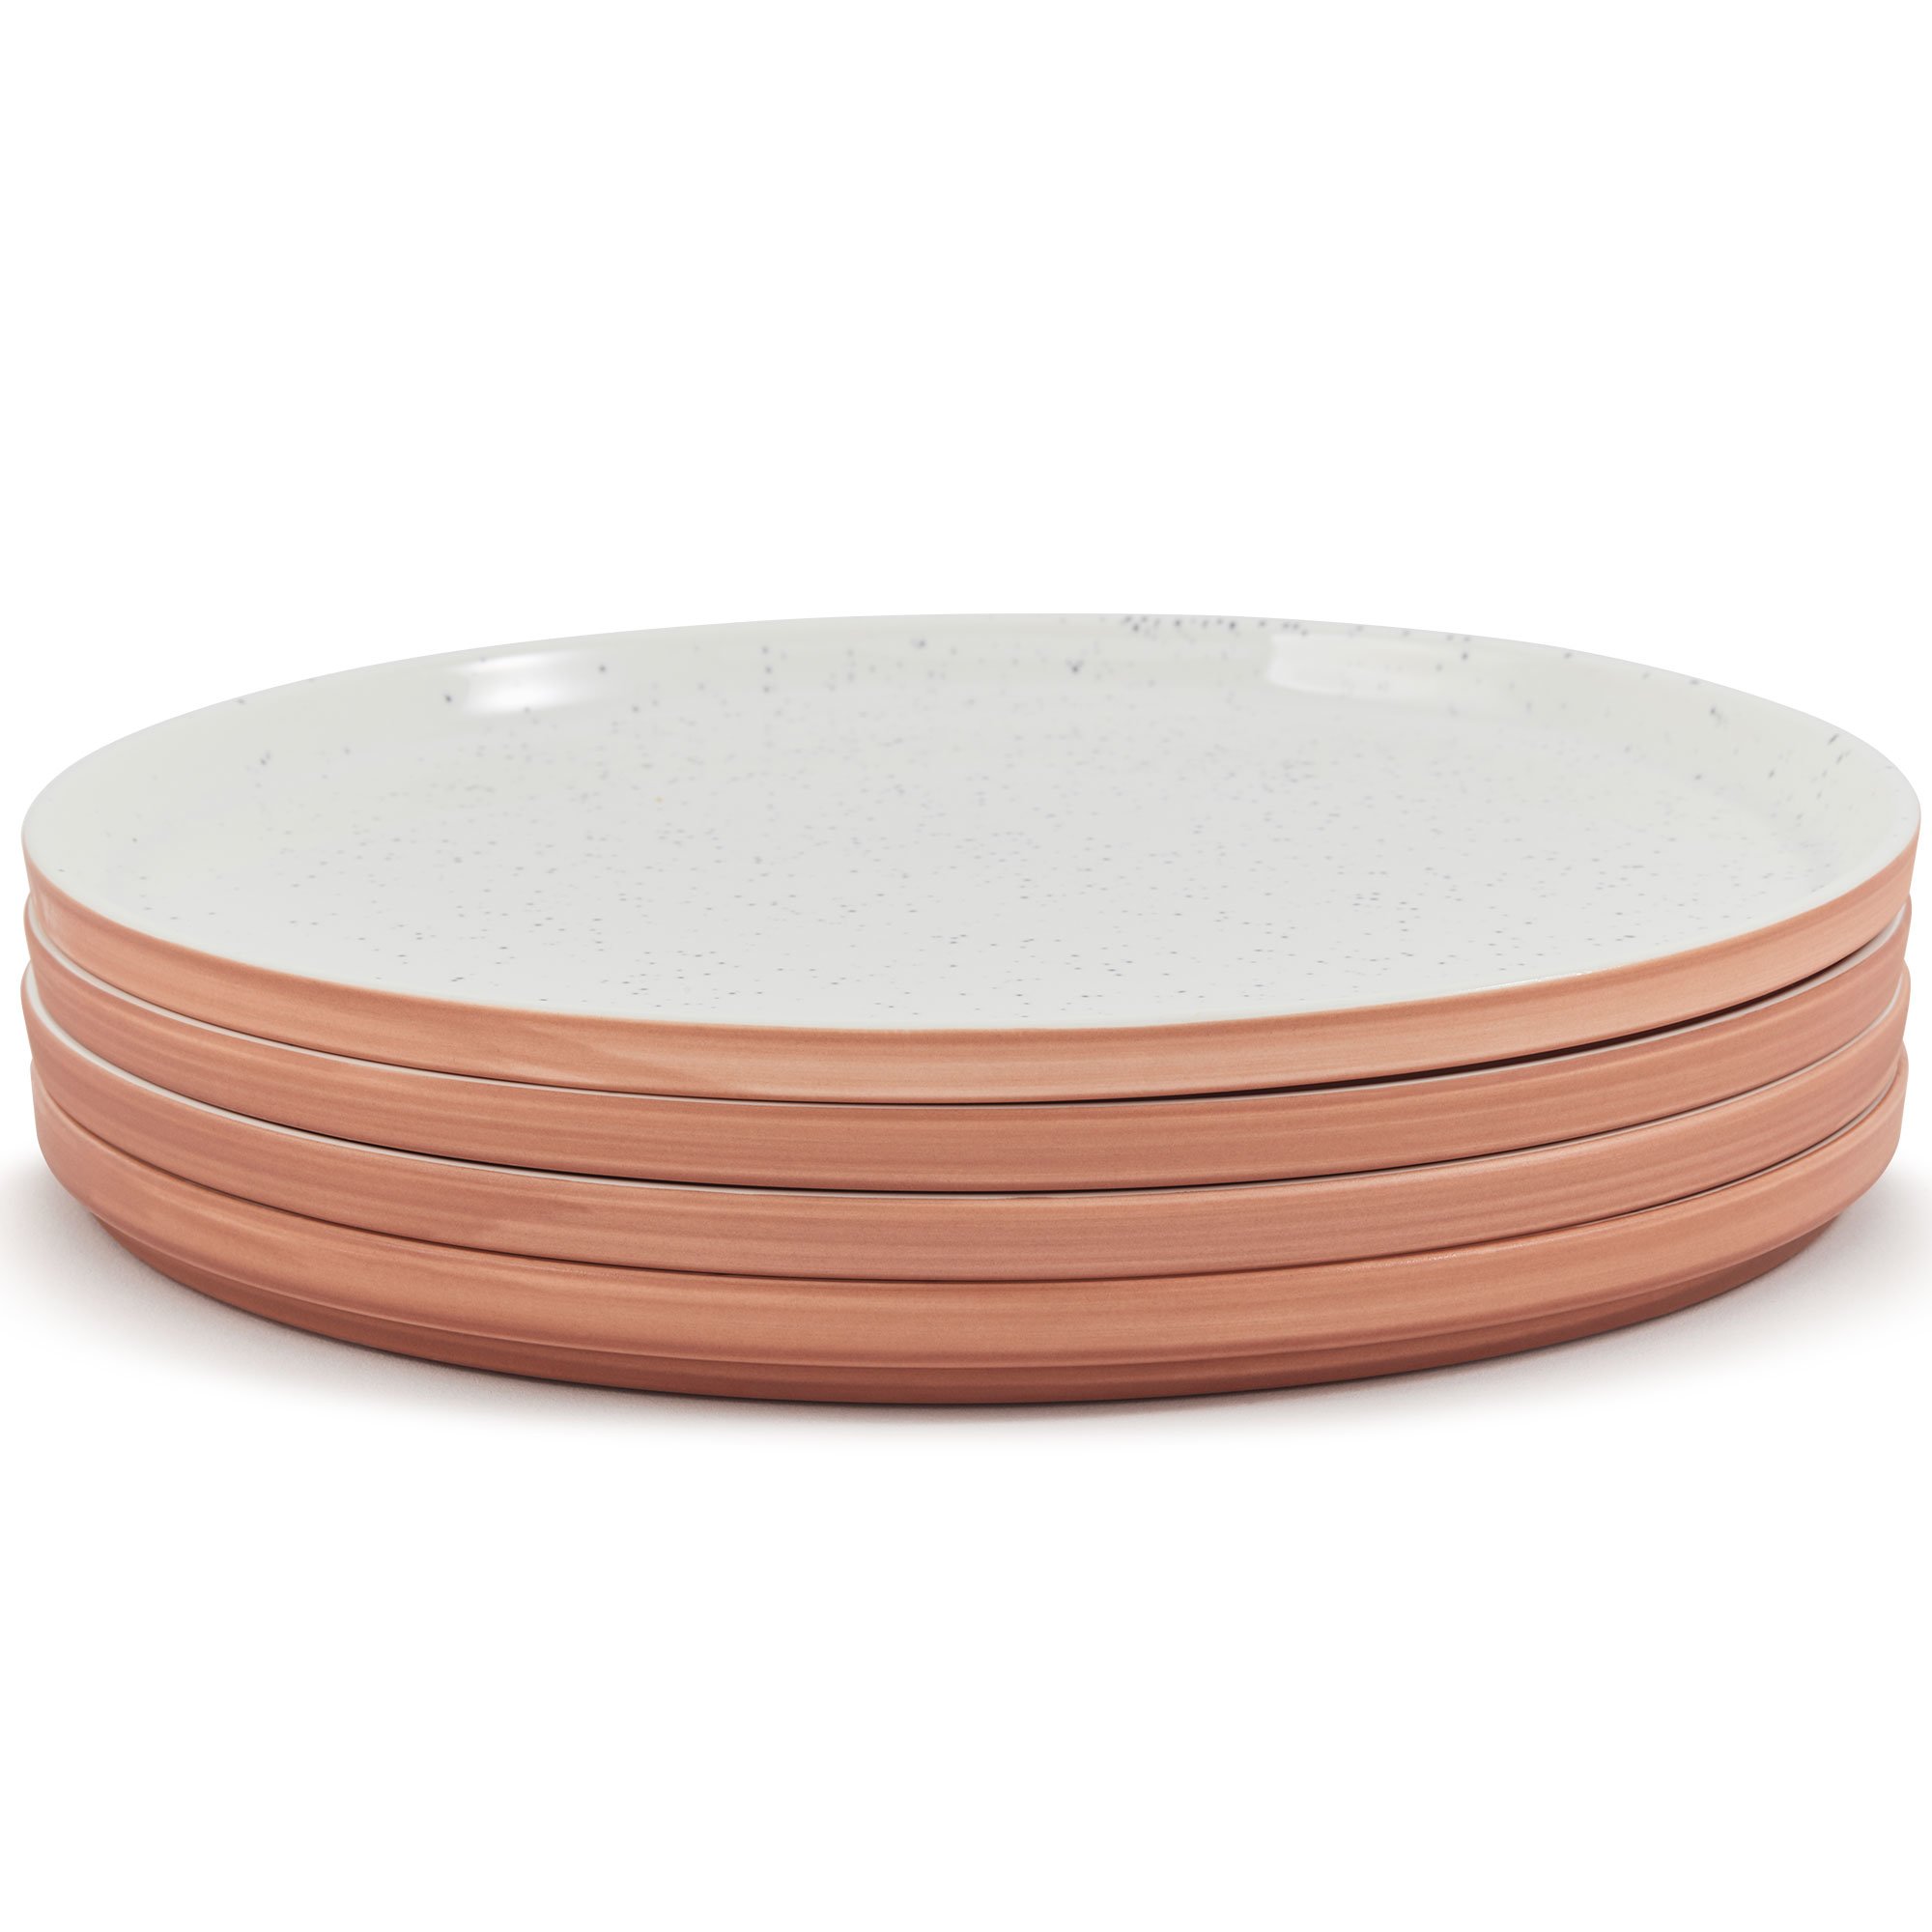 Our Place Main Plate tallerken 4-pack, spice